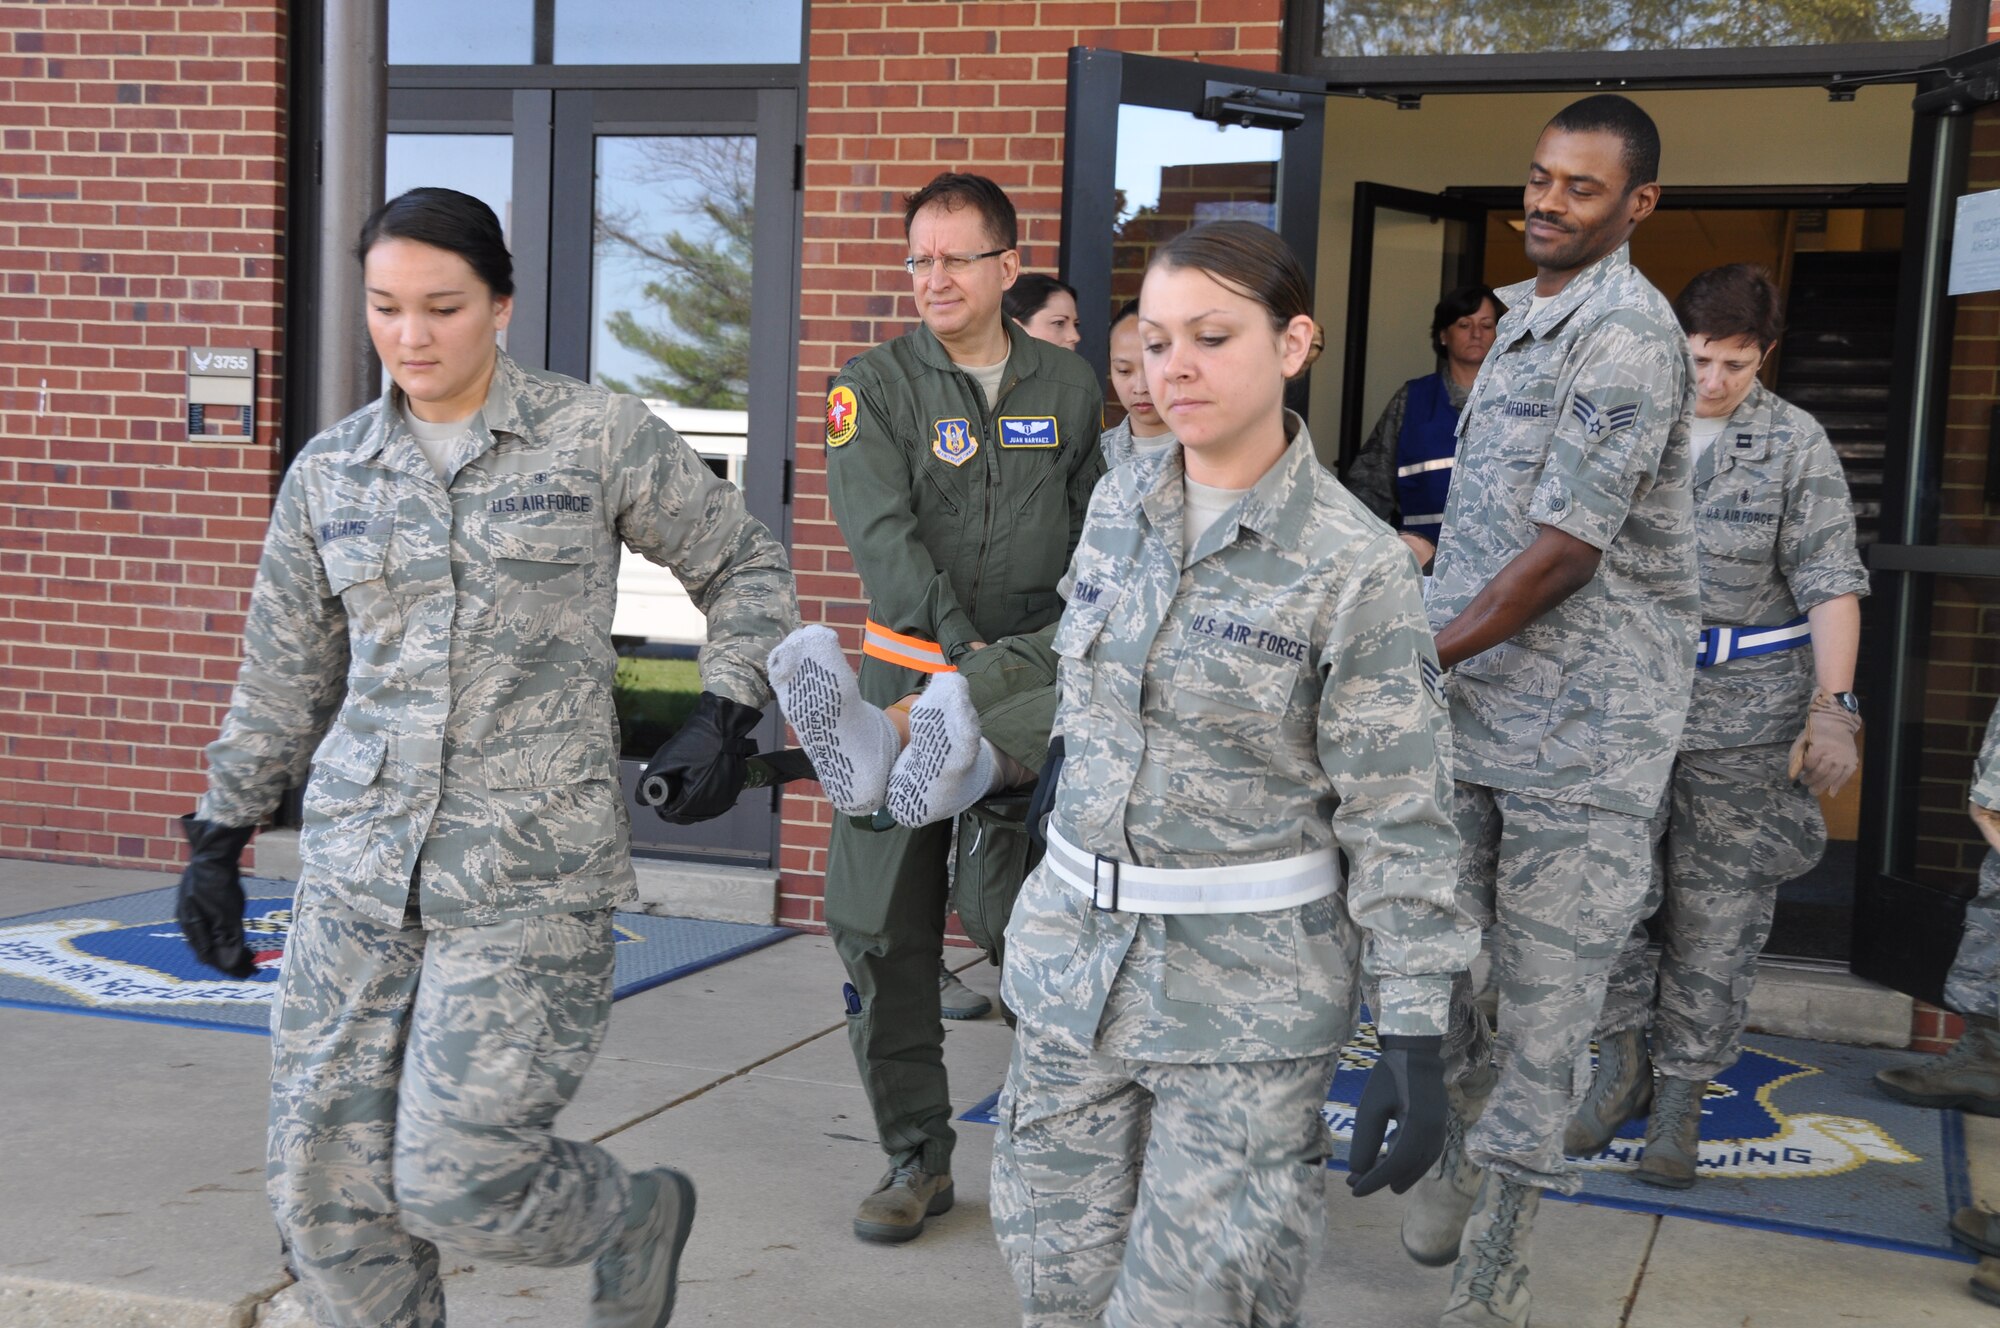 Members of the 459th Aeromedical Staging Squadron prepare to load a patient into a bus so that the patient may be transferred to tarmac for an aerial evacuation. The exercise mimicked emergency medical situation in the event of a disaster at Joint Base Andrews on Monday, May 4, 2015 (Air Force Photo / Senior Airman Kristin Kurtz)